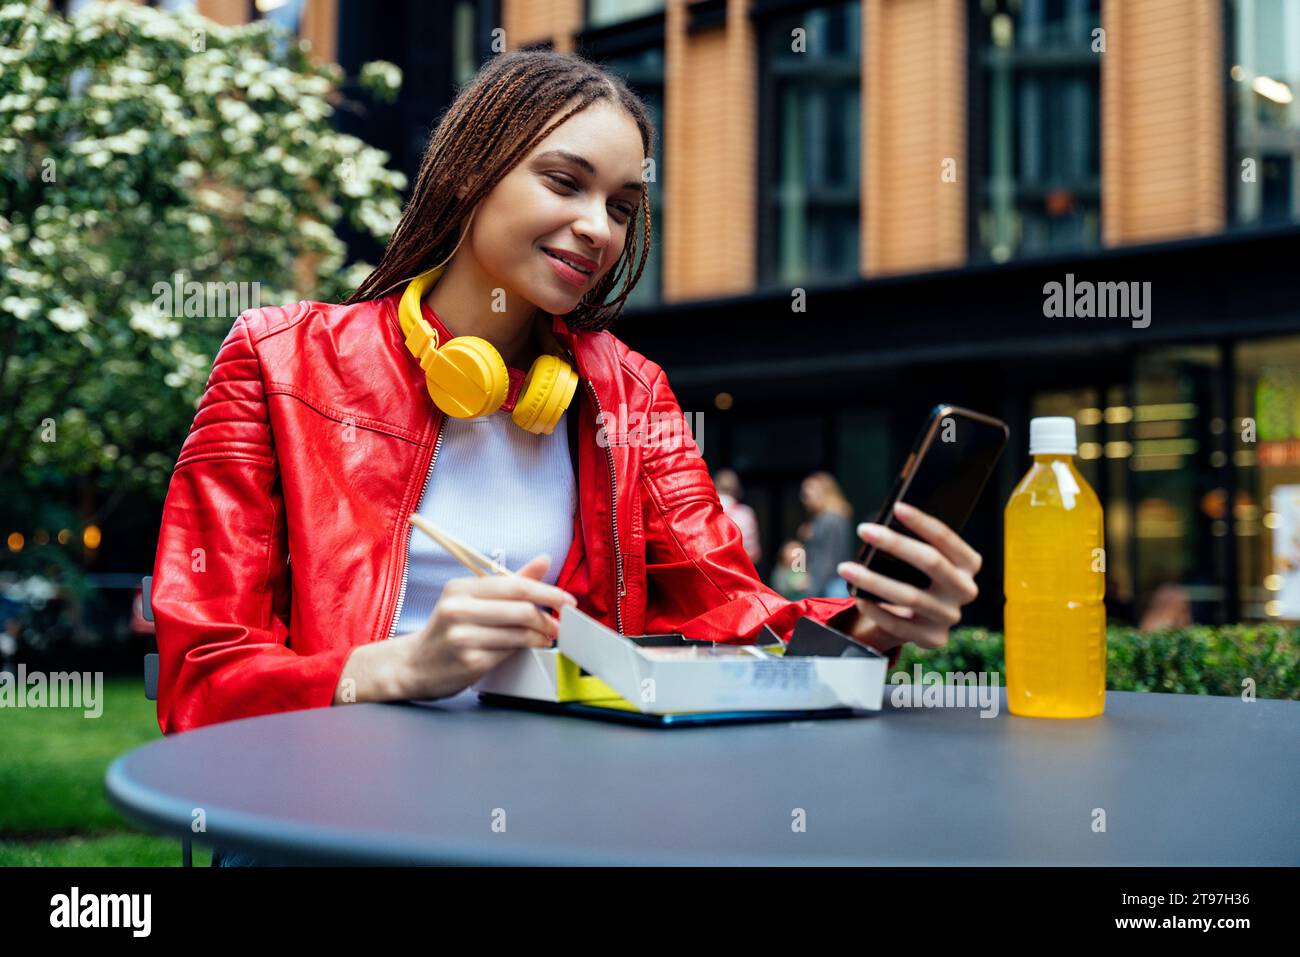 Smiling woman using mobile phone and having sushi on table at sidewalk cafe Stock Photo